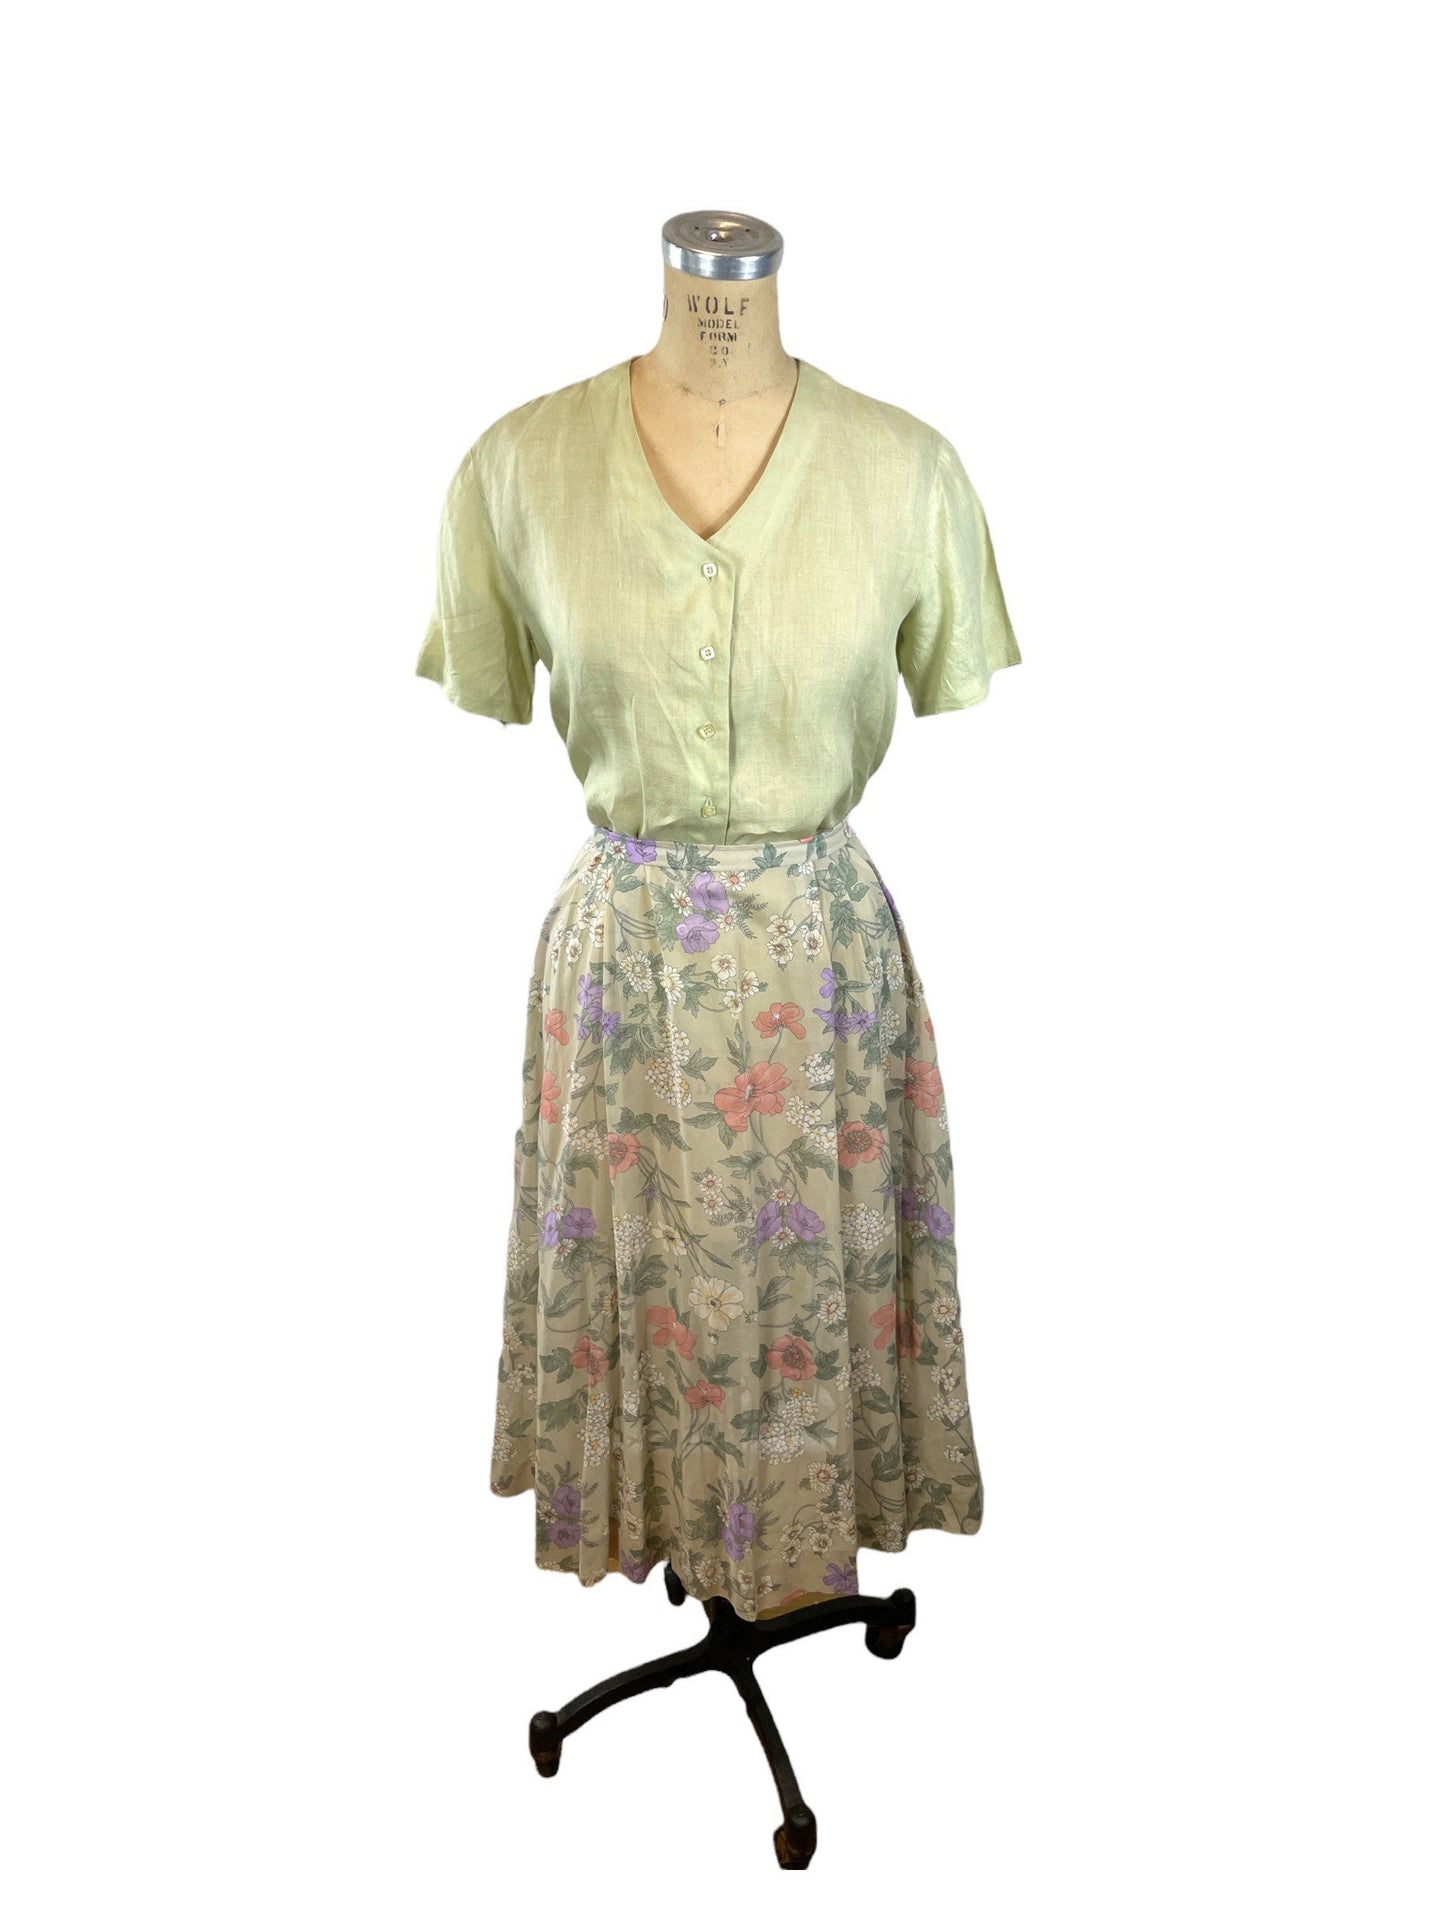 1980s 90s floral skirt pleated flowing semi-sheer Size M